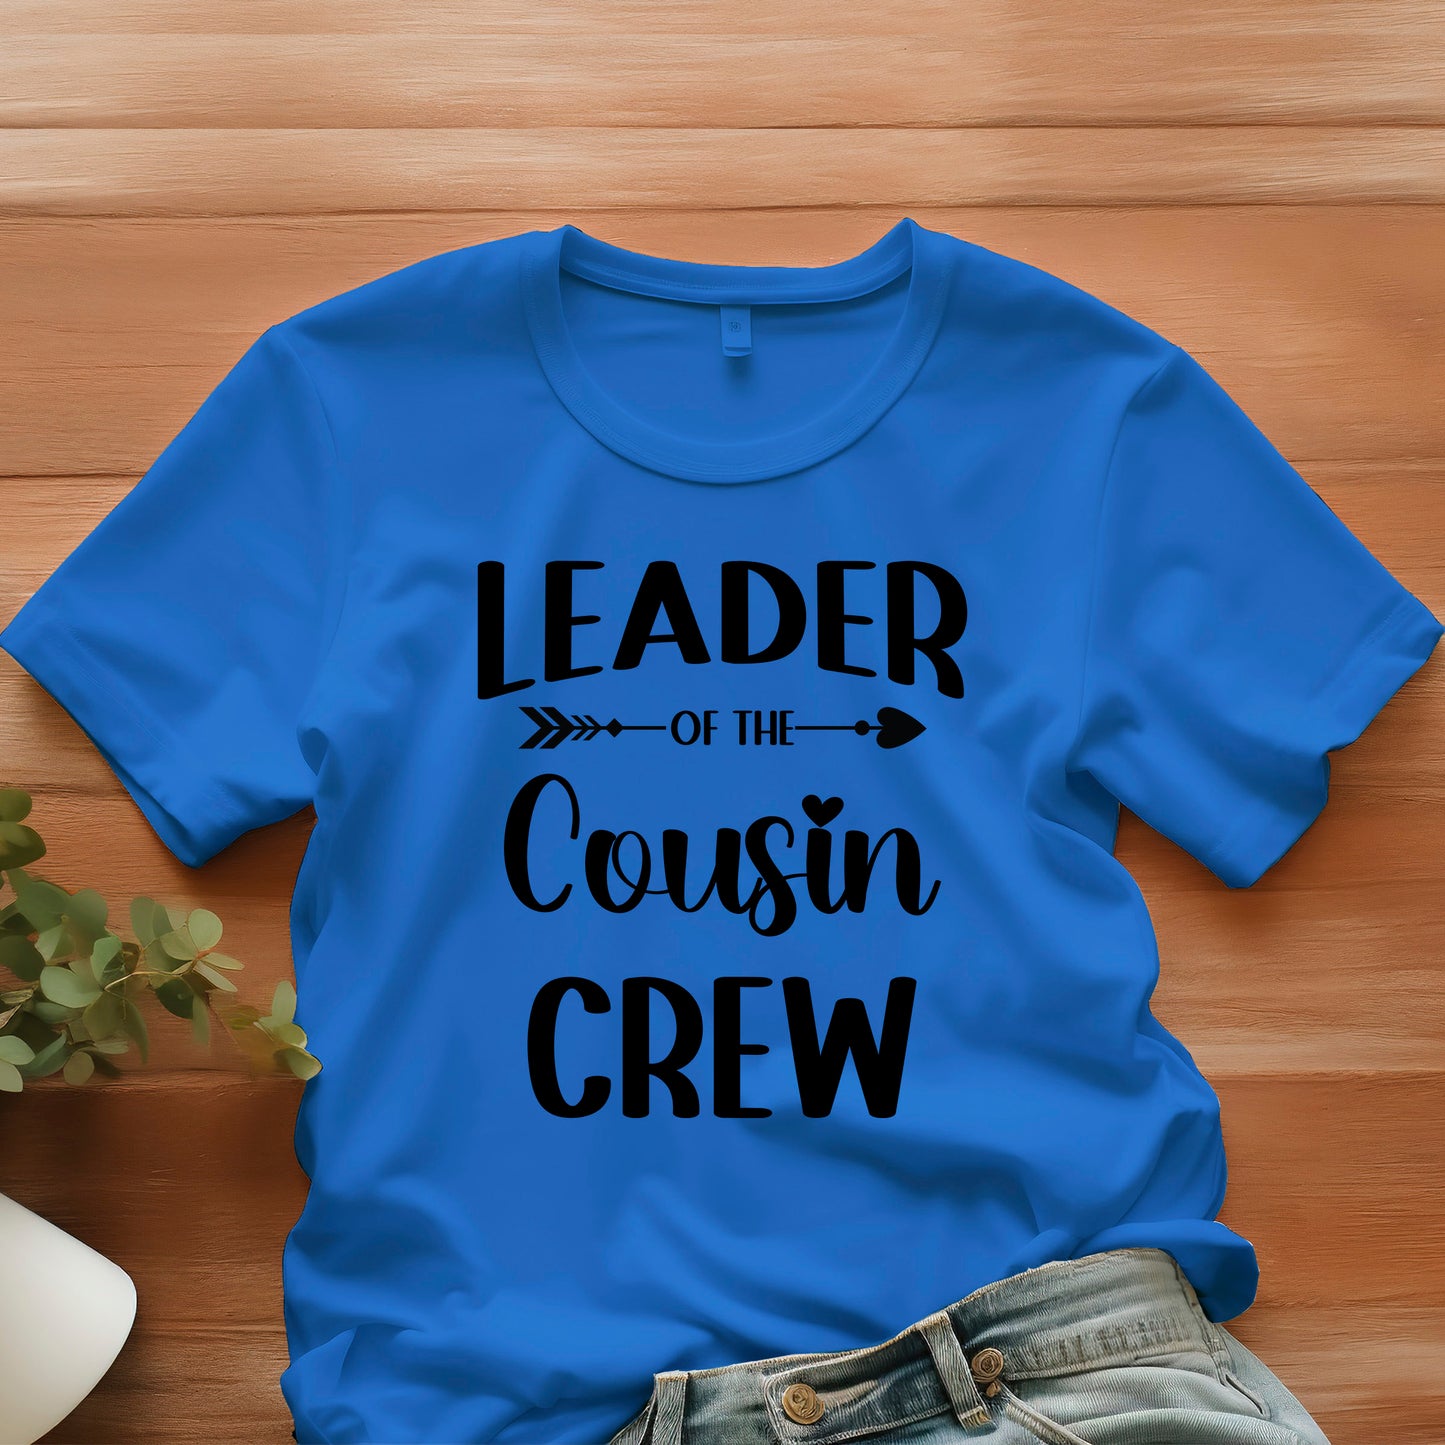 Leader Of The Cousin Crew Shirt